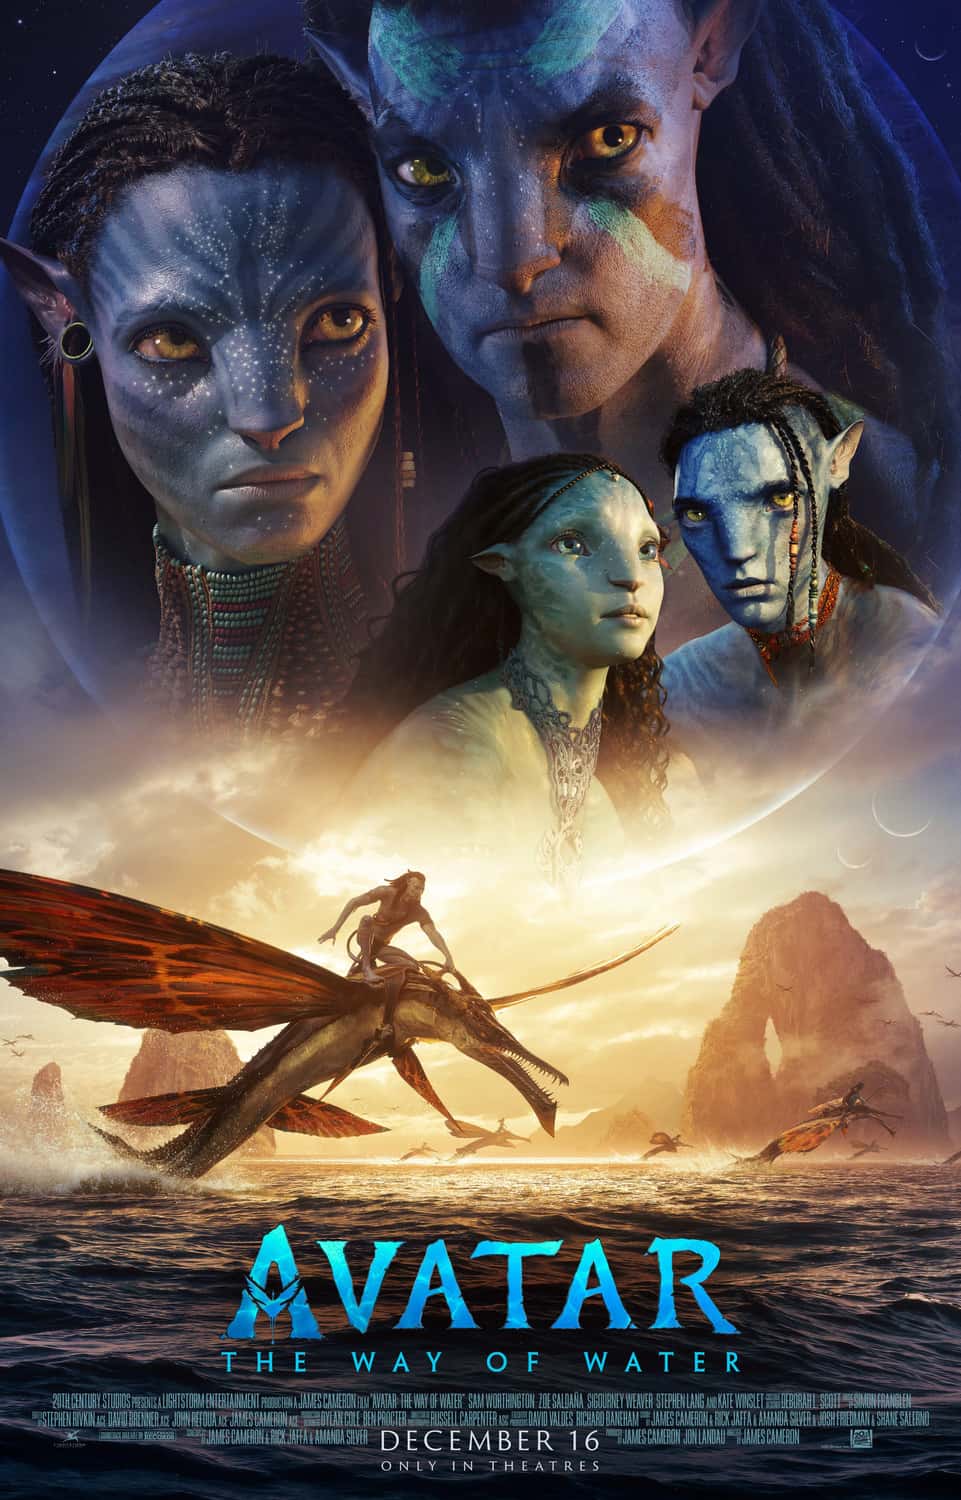 UK Box Office Weekend Report 27th - 29th January 2023:  7 weeks at the top of the UK box office for Avatar 2 while Pathaan is the top new movie at number 2